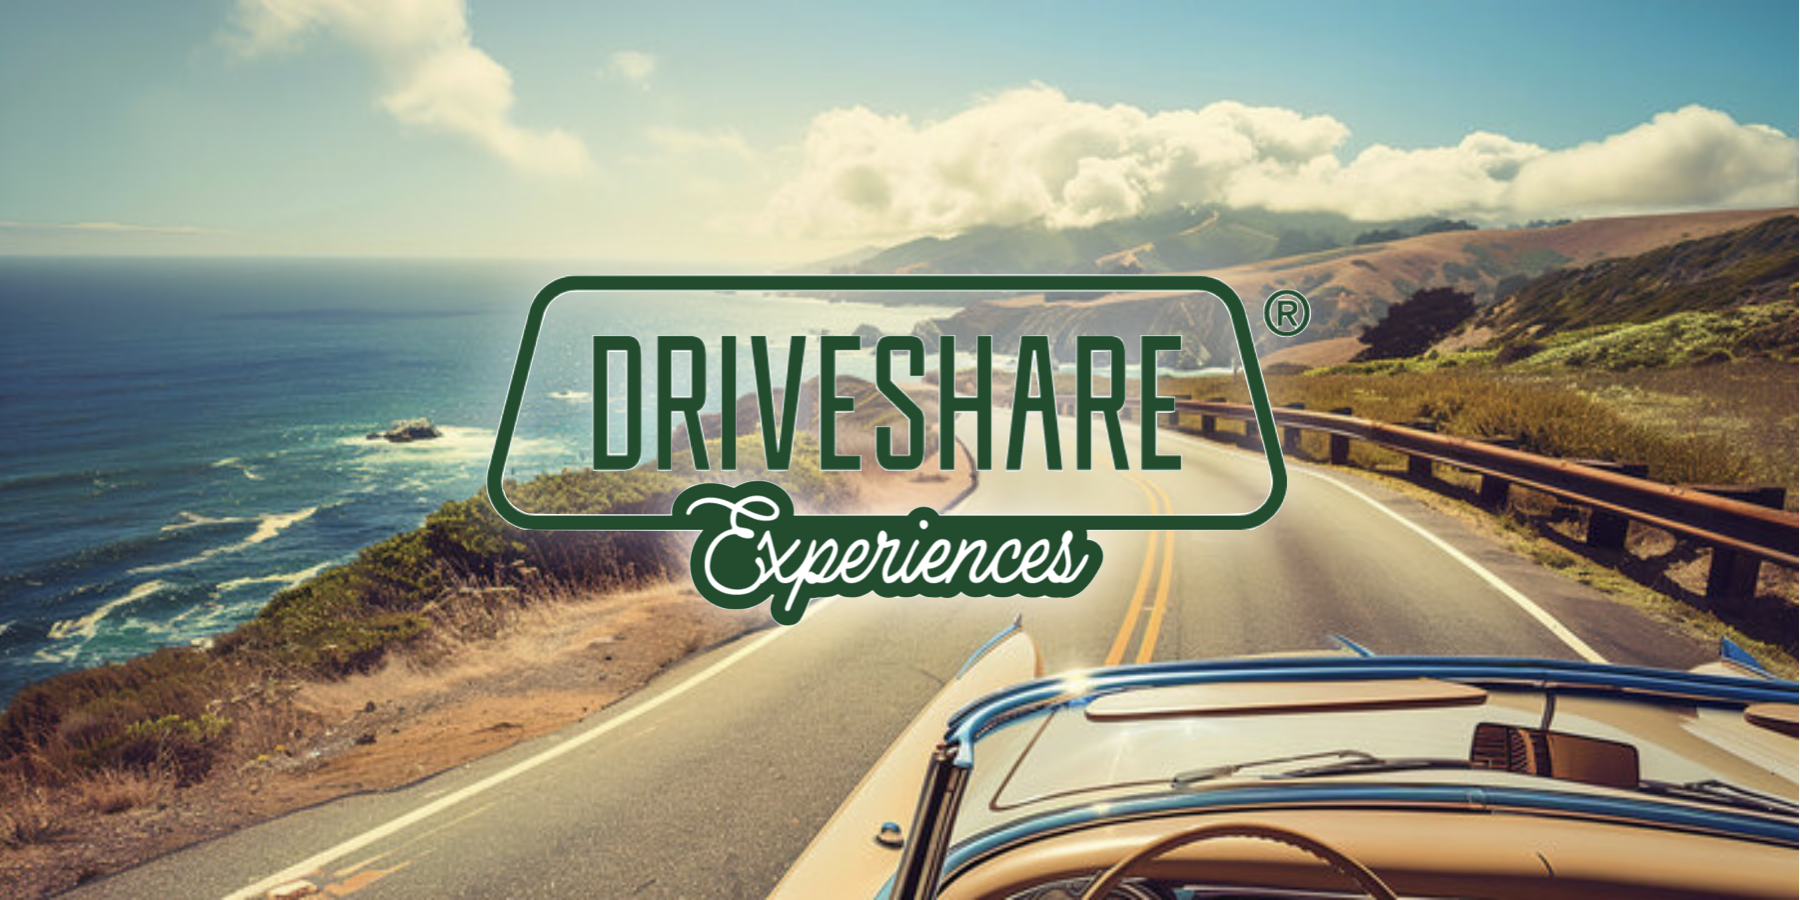 Welcome to DRIVESHARE Experiences